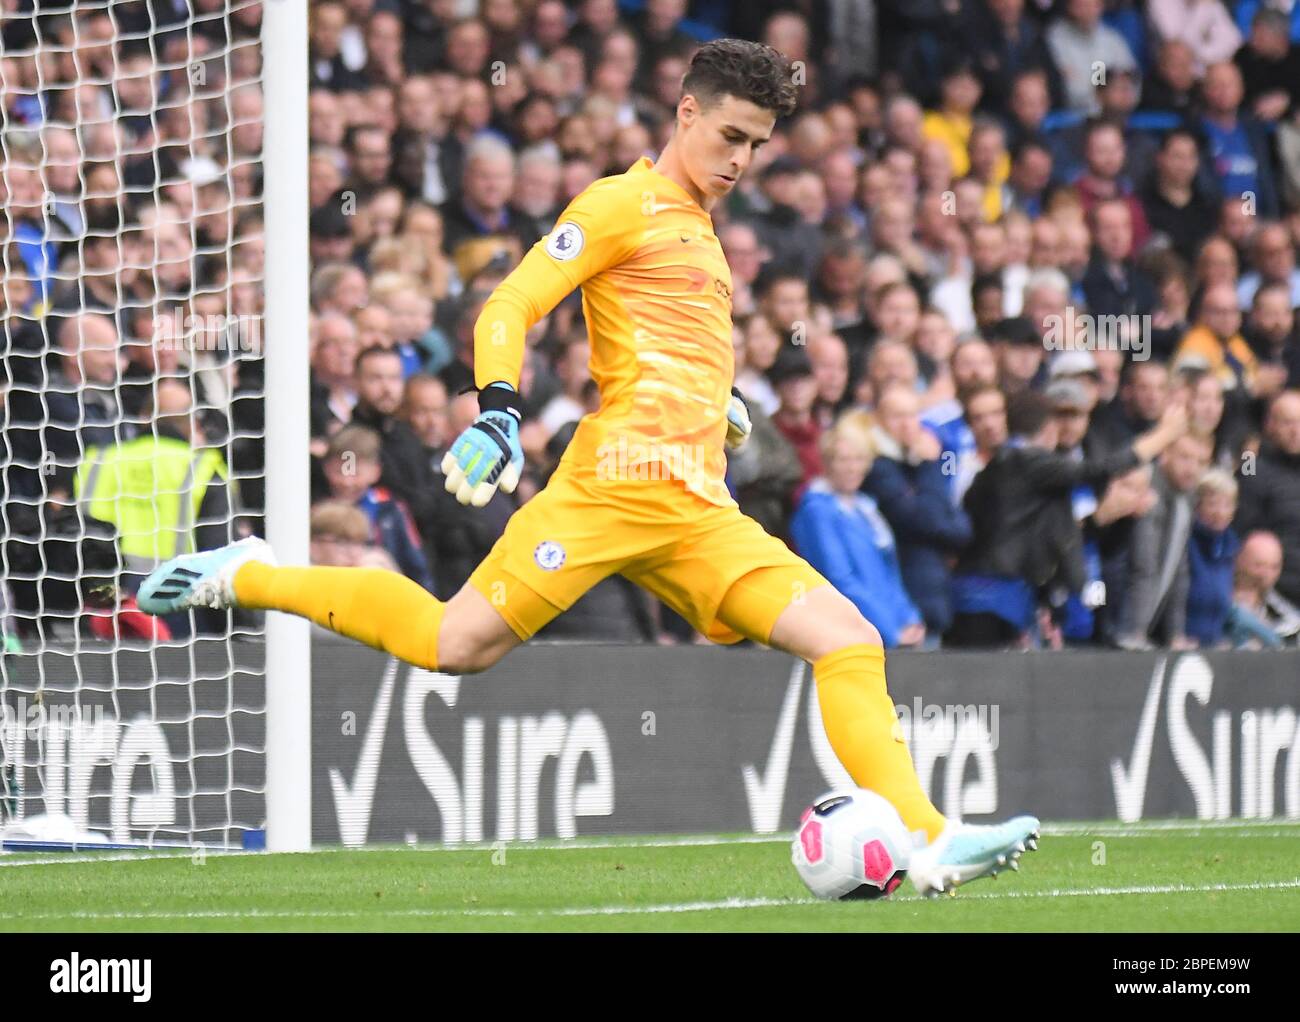 LONDON, ENGLAND - SEPTEMBER 22, 2019: Kepa Arrizabalaga of Chelsea pictured during the 2019/20 Premier League game between Chelsea FC and Liverpool FC at Stamford Bridge. Stock Photo